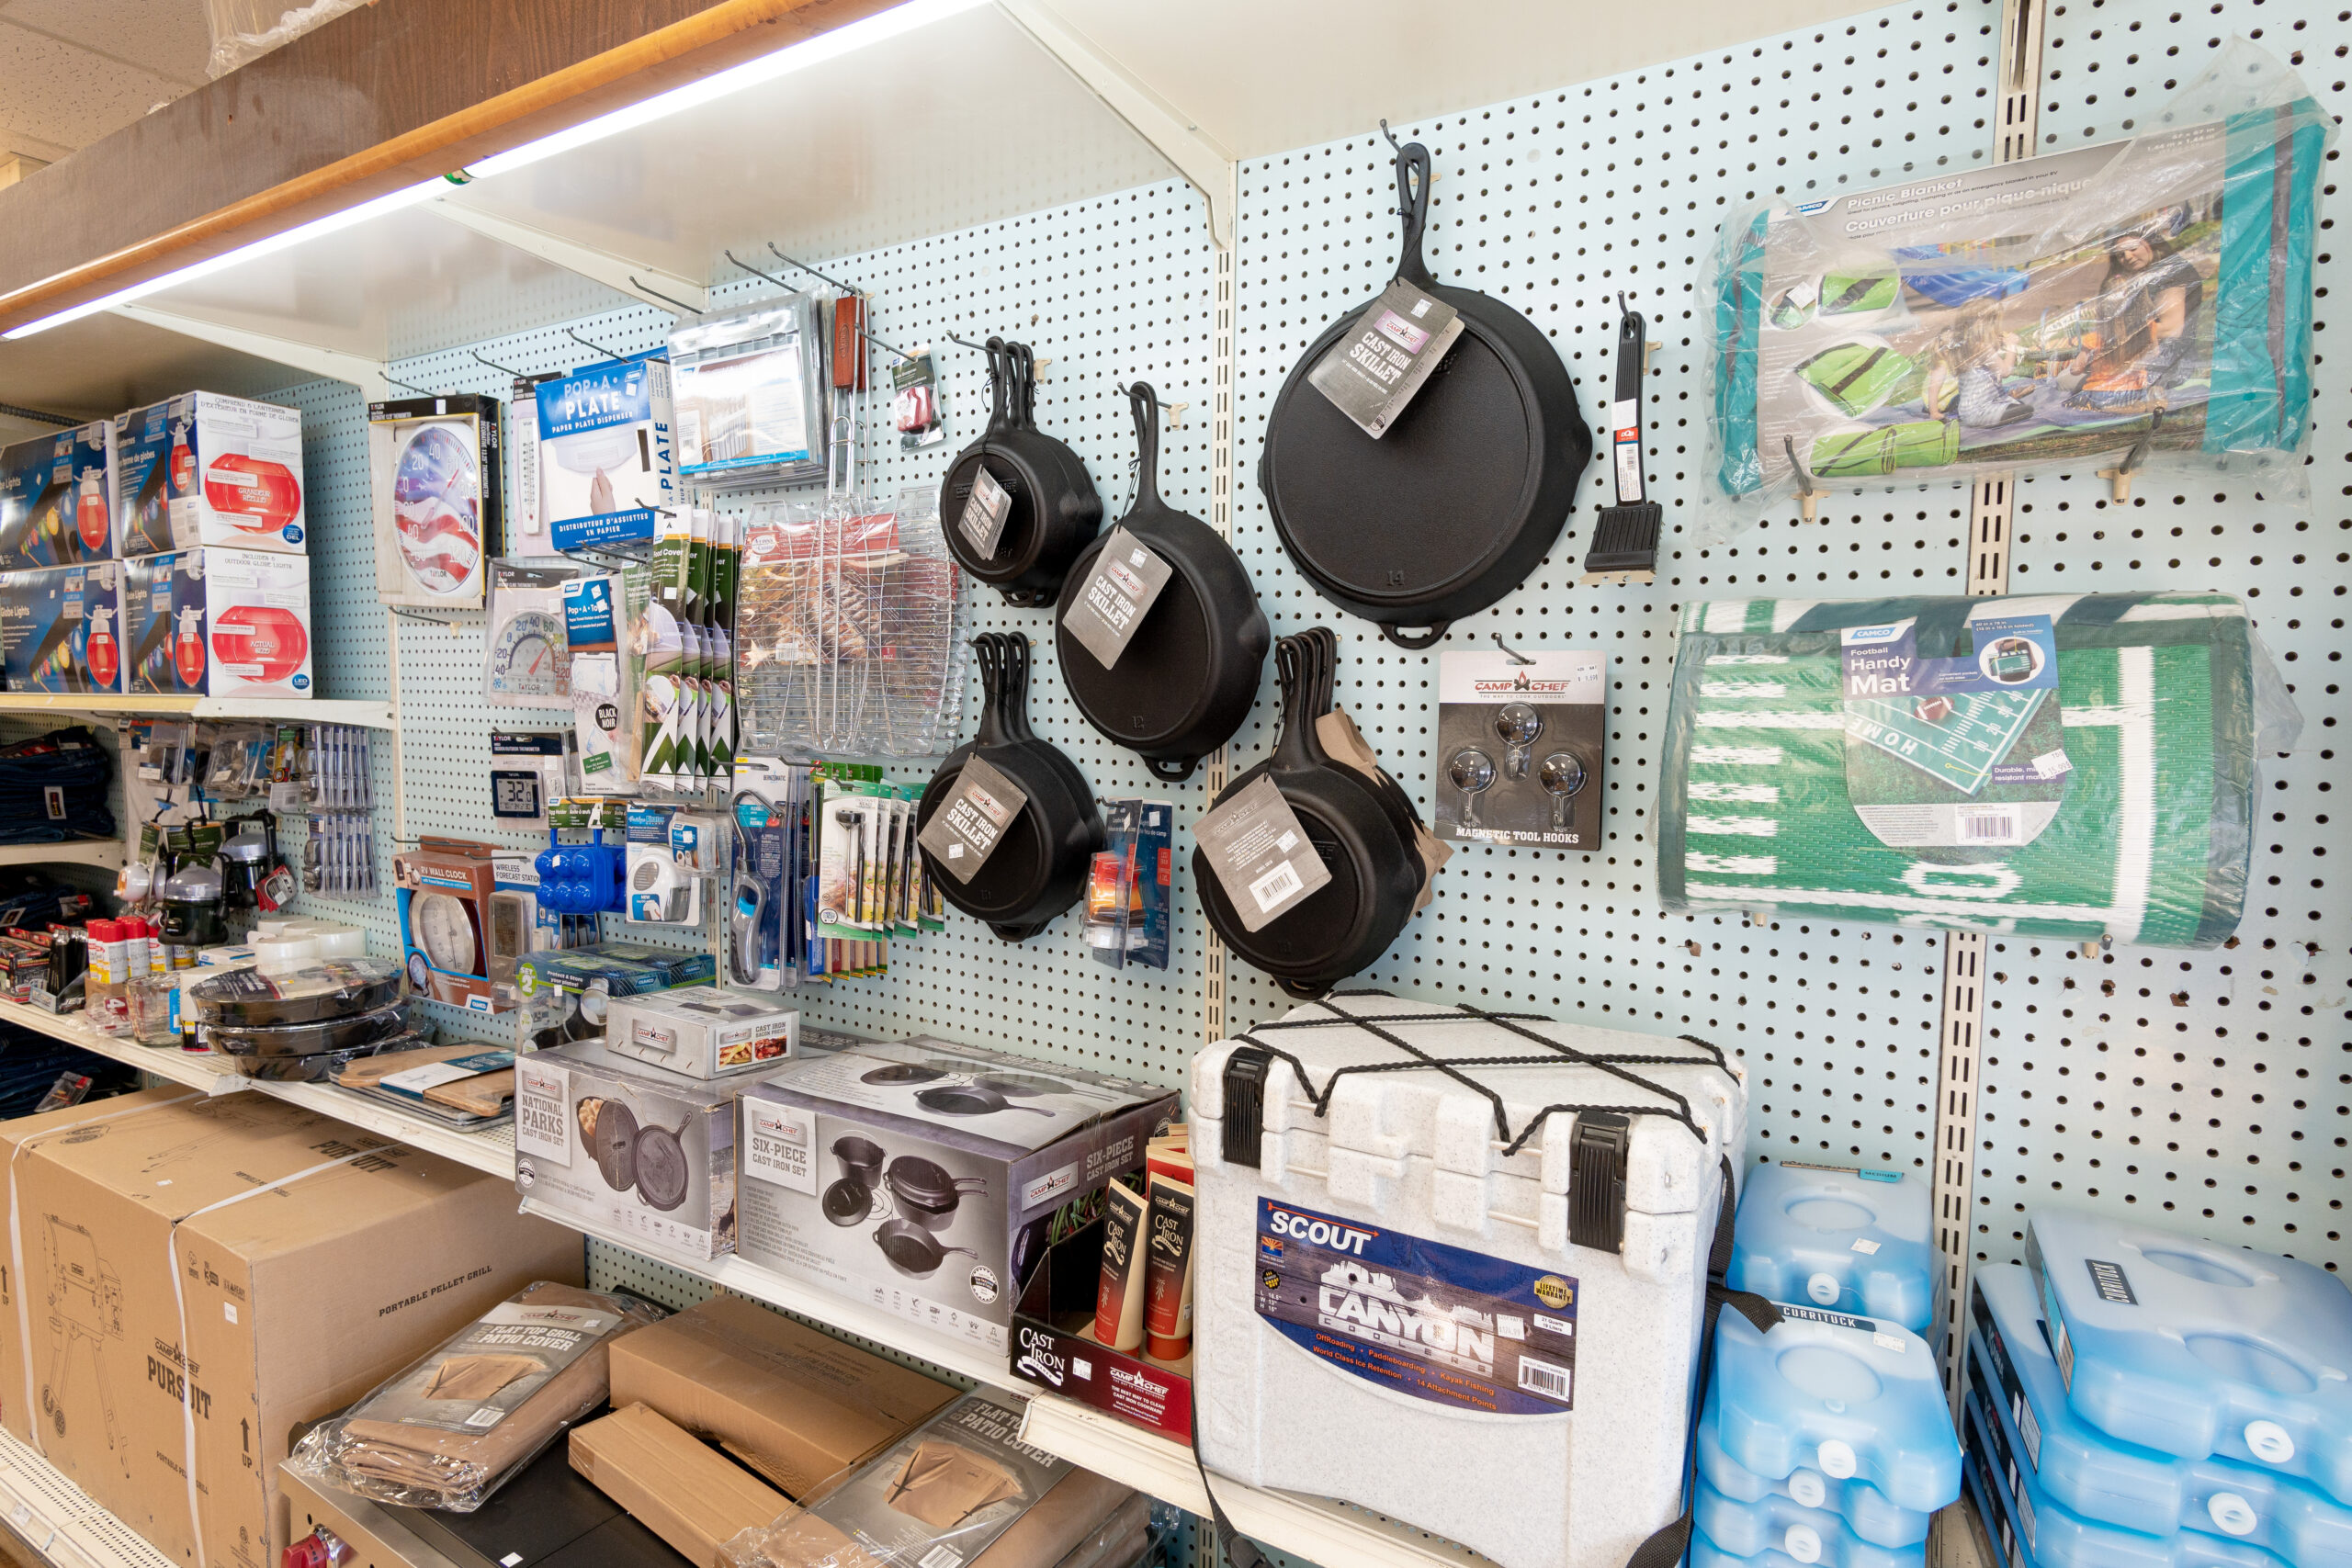 Various Camping supplies, including coolers, grill accessories, & picnic blankets